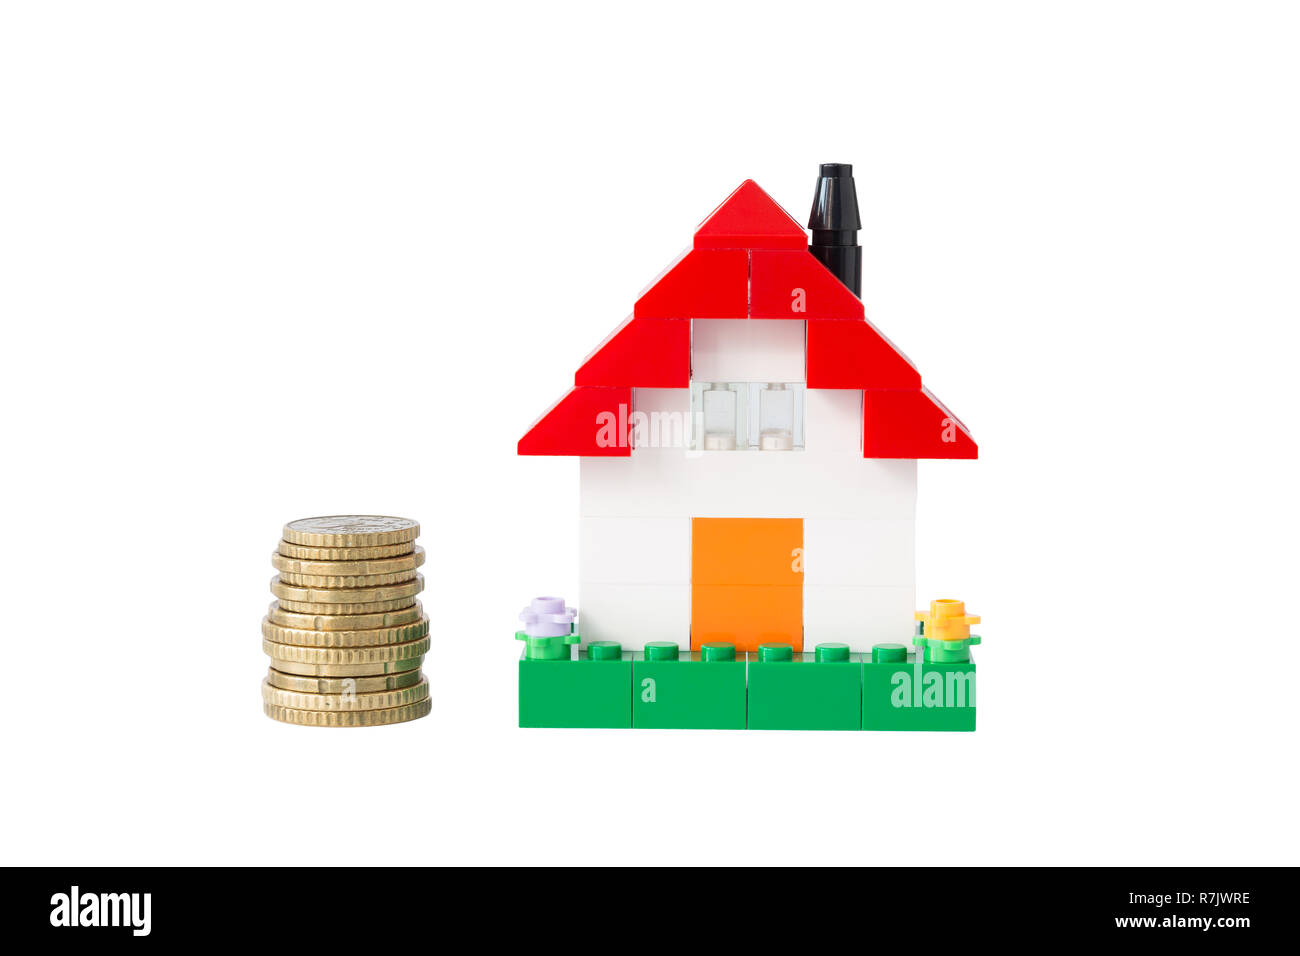 Stack of coins and simple house made of toy building bricks, isolated on white.Concept photo of mortgage,real estate business or house ownership. Stock Photo